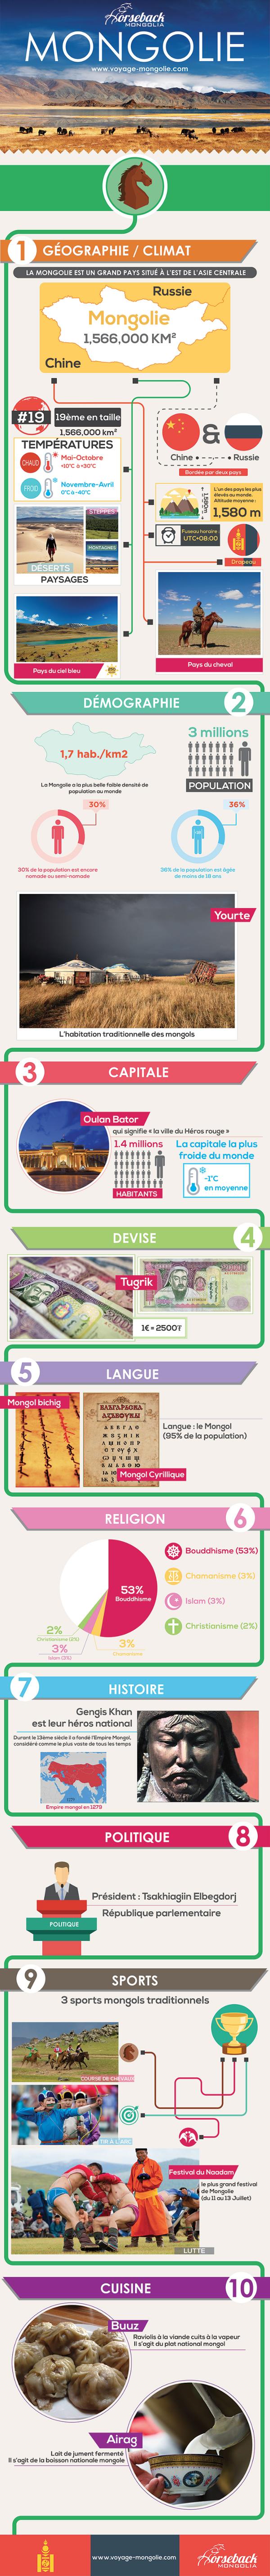 Infographie Voyage Mongolie